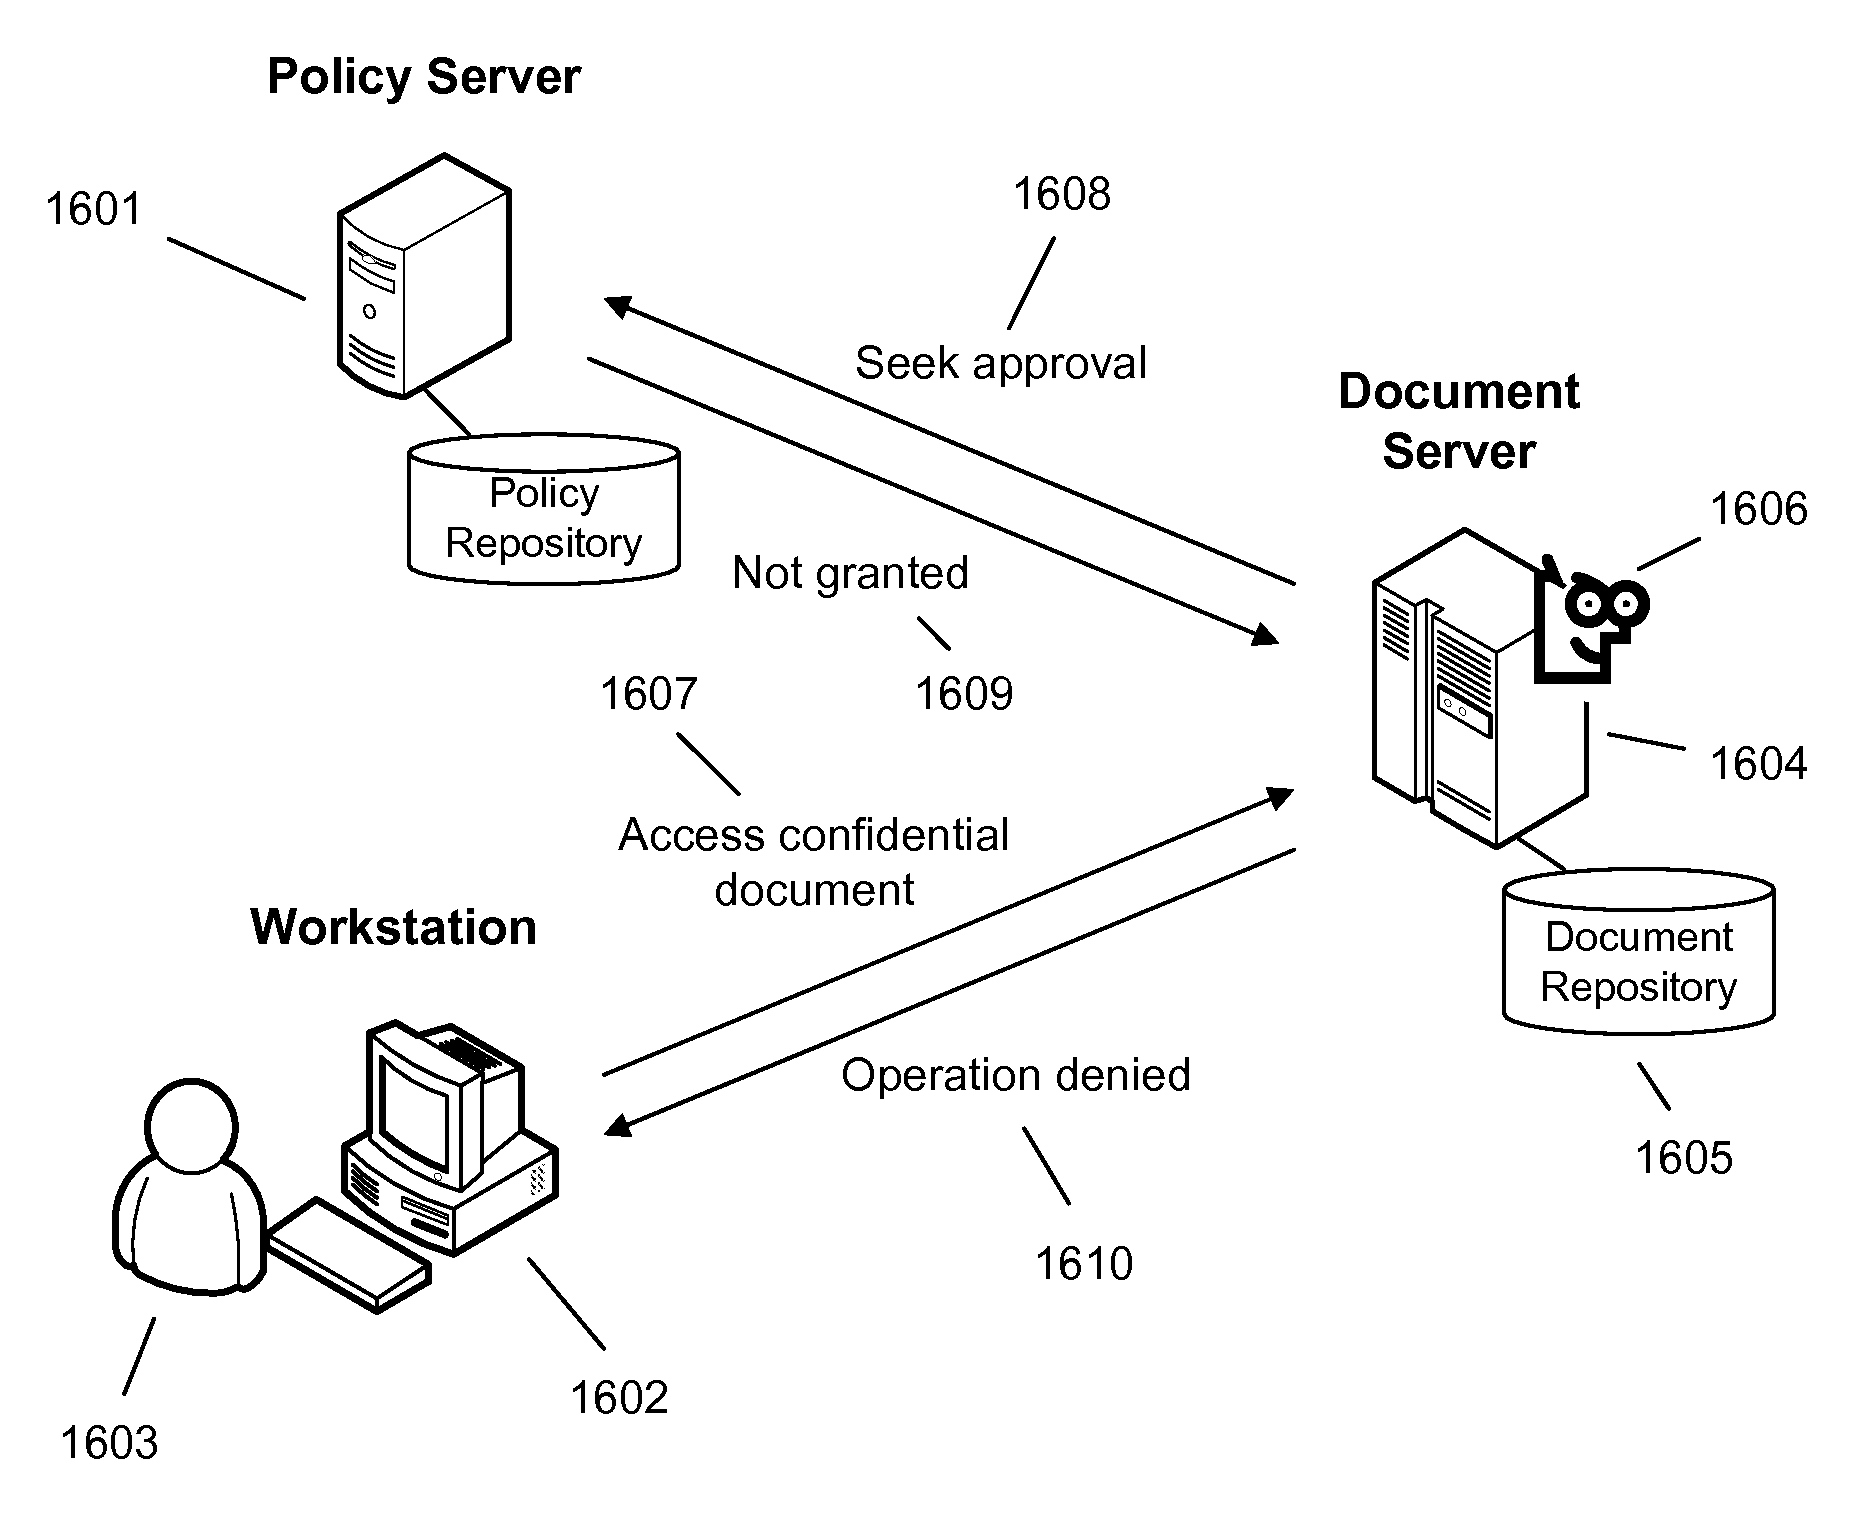 Techniques and system to manage access of information using policies